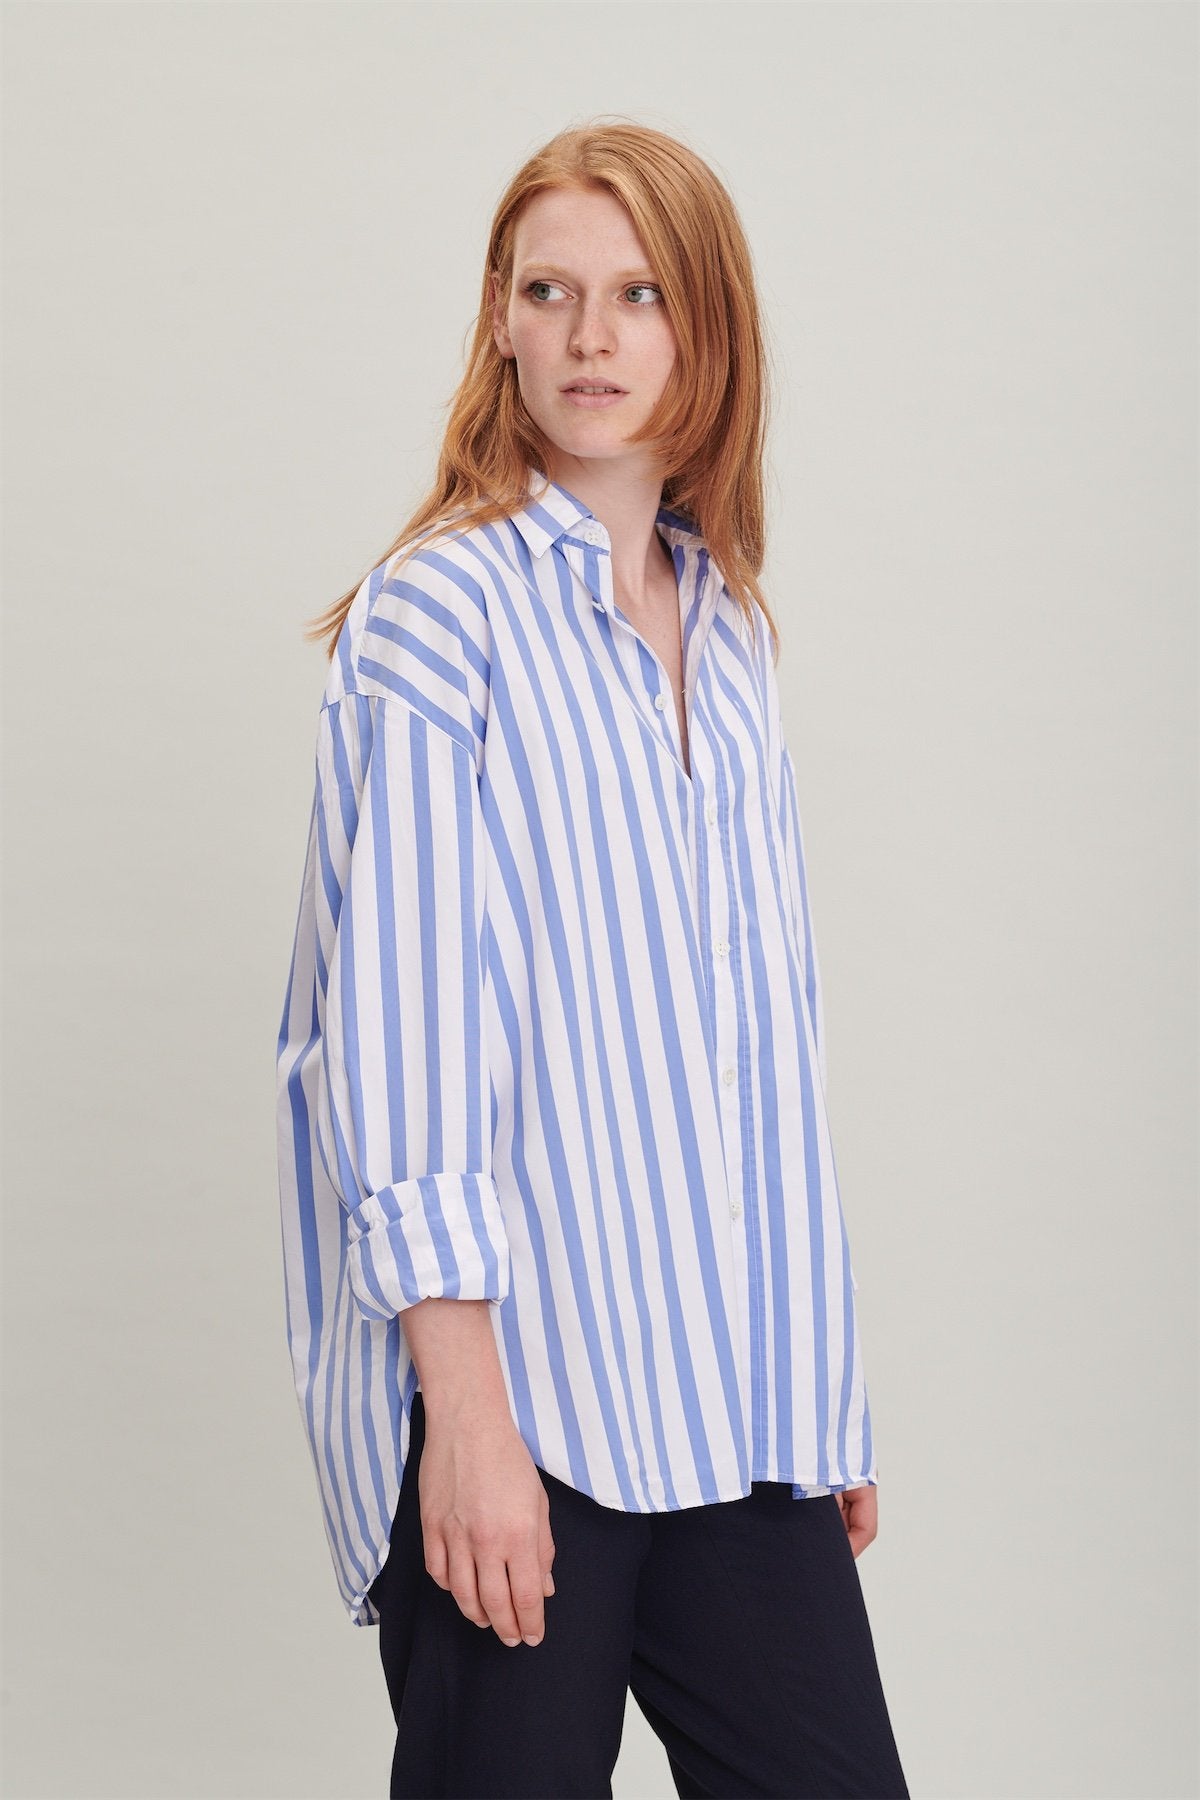 Oversized Rider Shirt in a Blue Striped Italian Cotton and Cupro